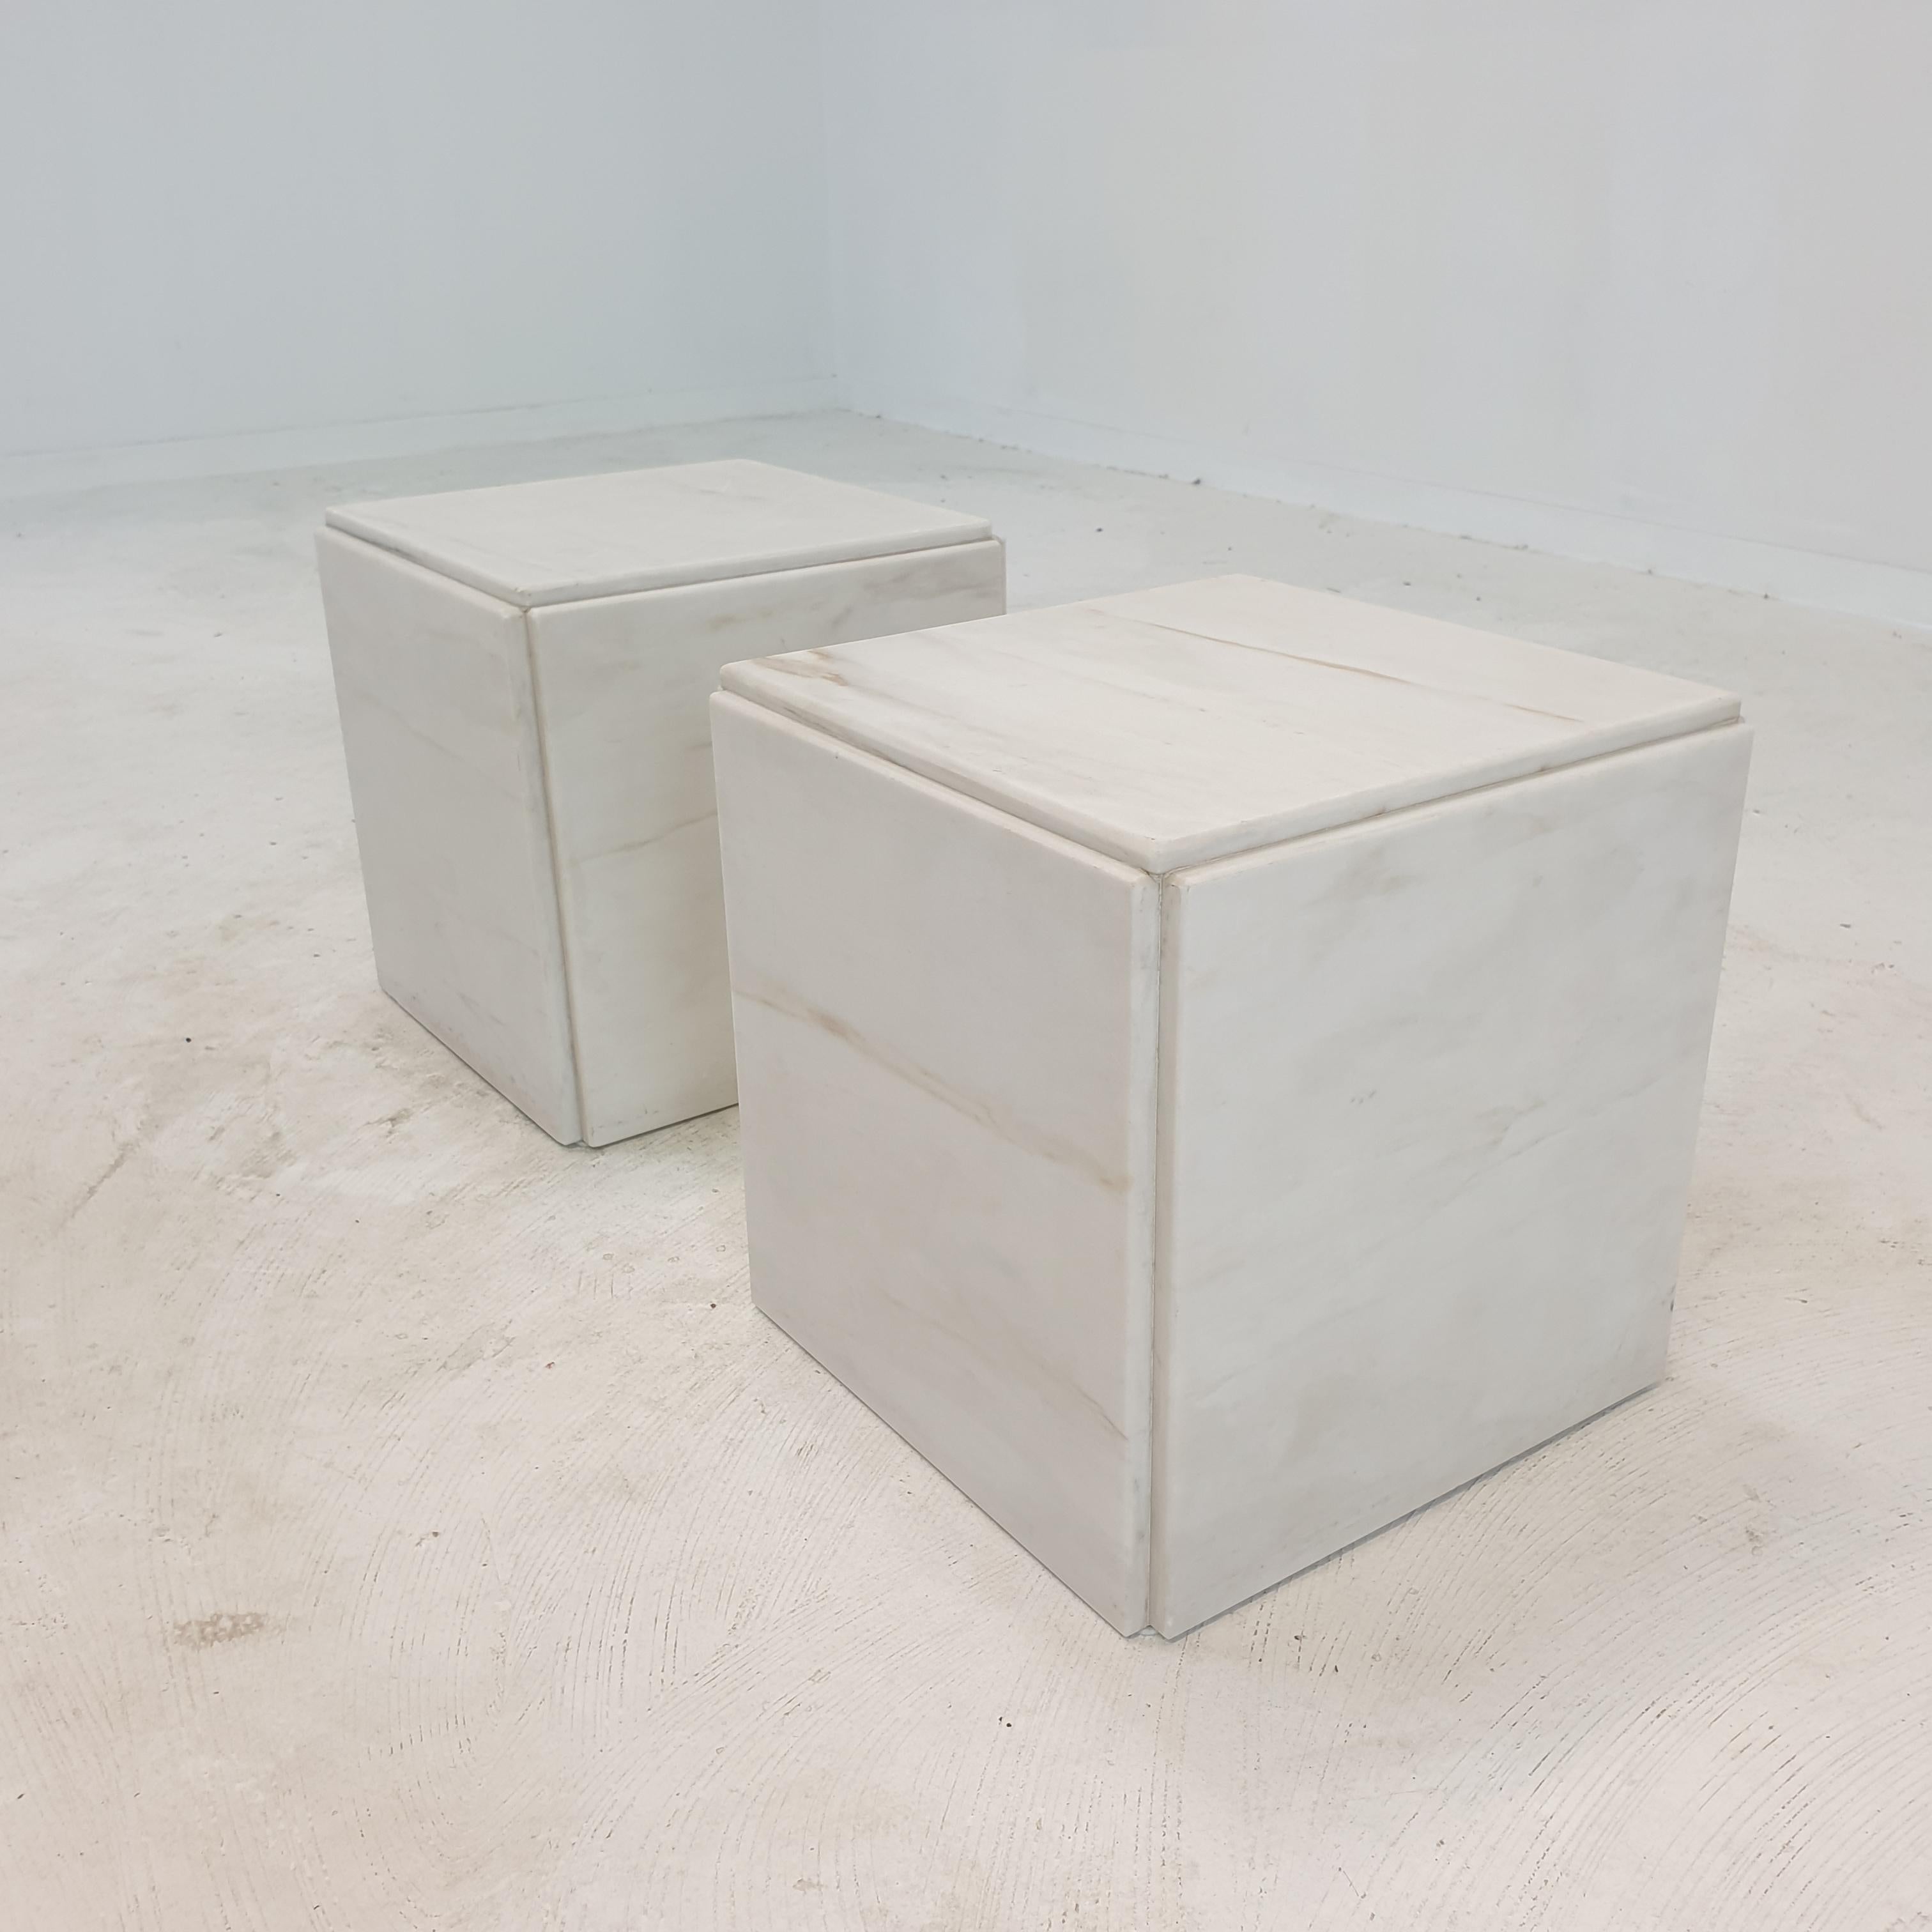 Set of 2 Italian Marble Pedestals or Side Tables, 1980's For Sale 1